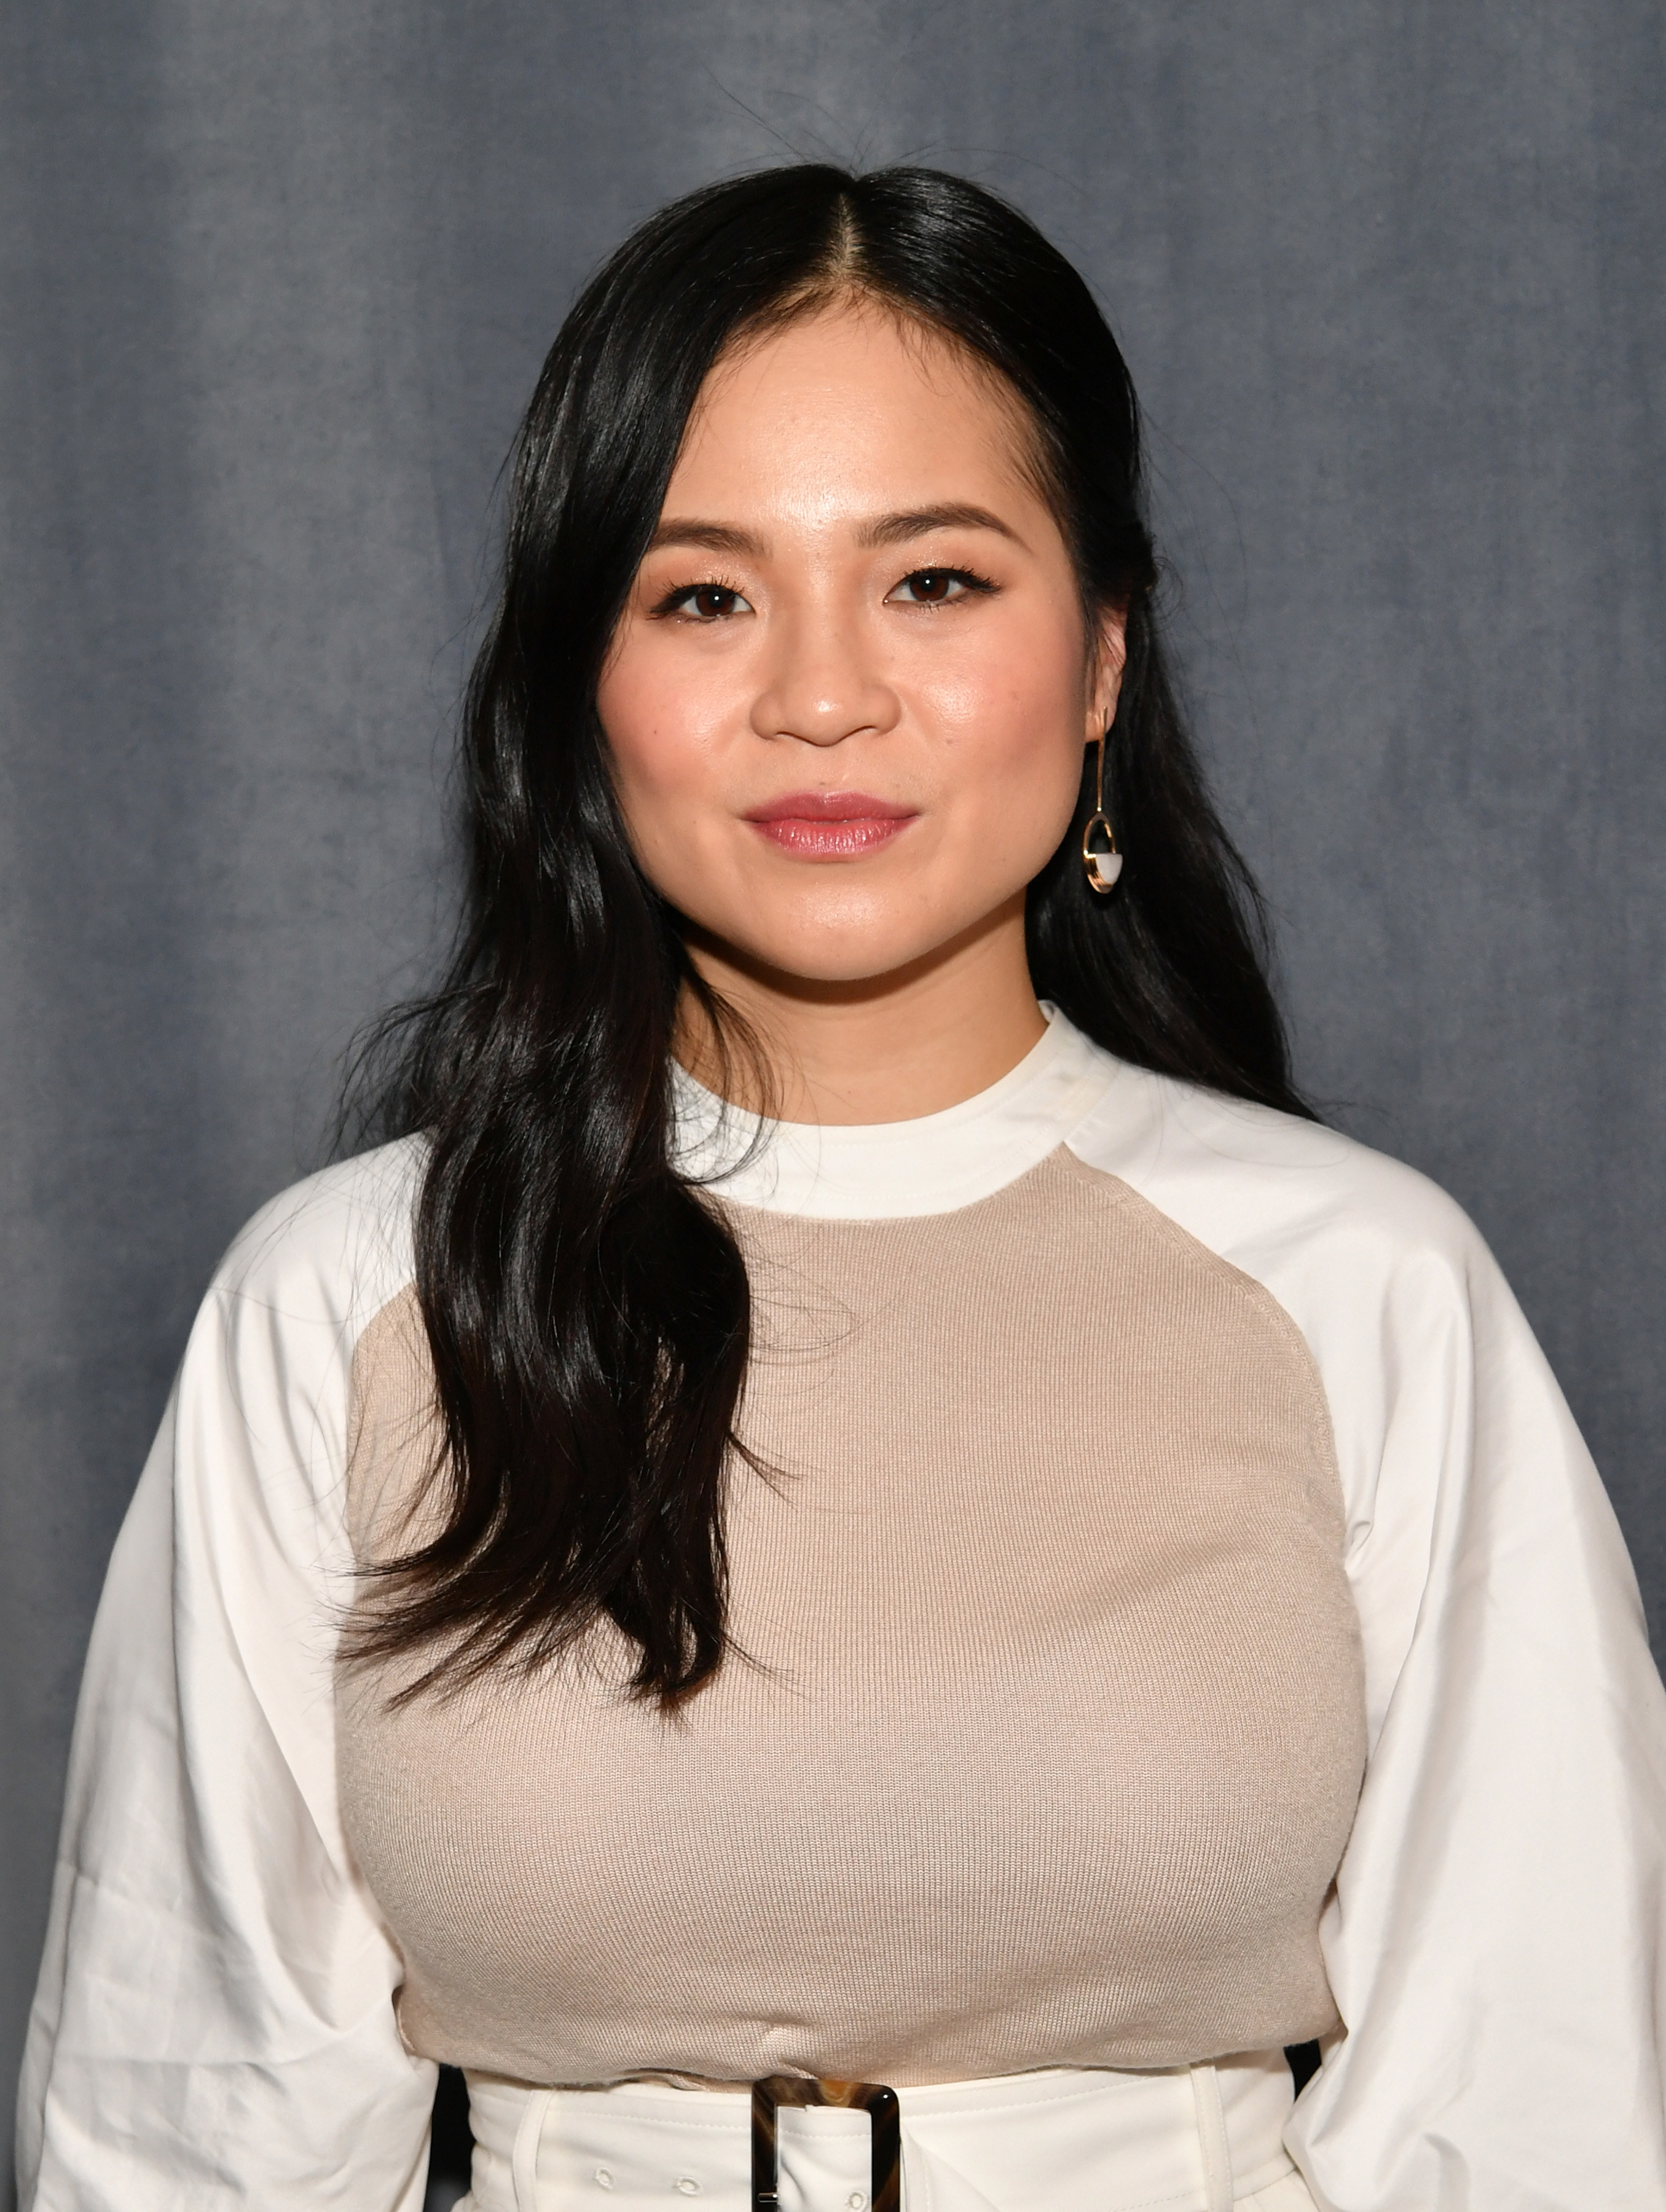 Kelly Marie Tran at an event